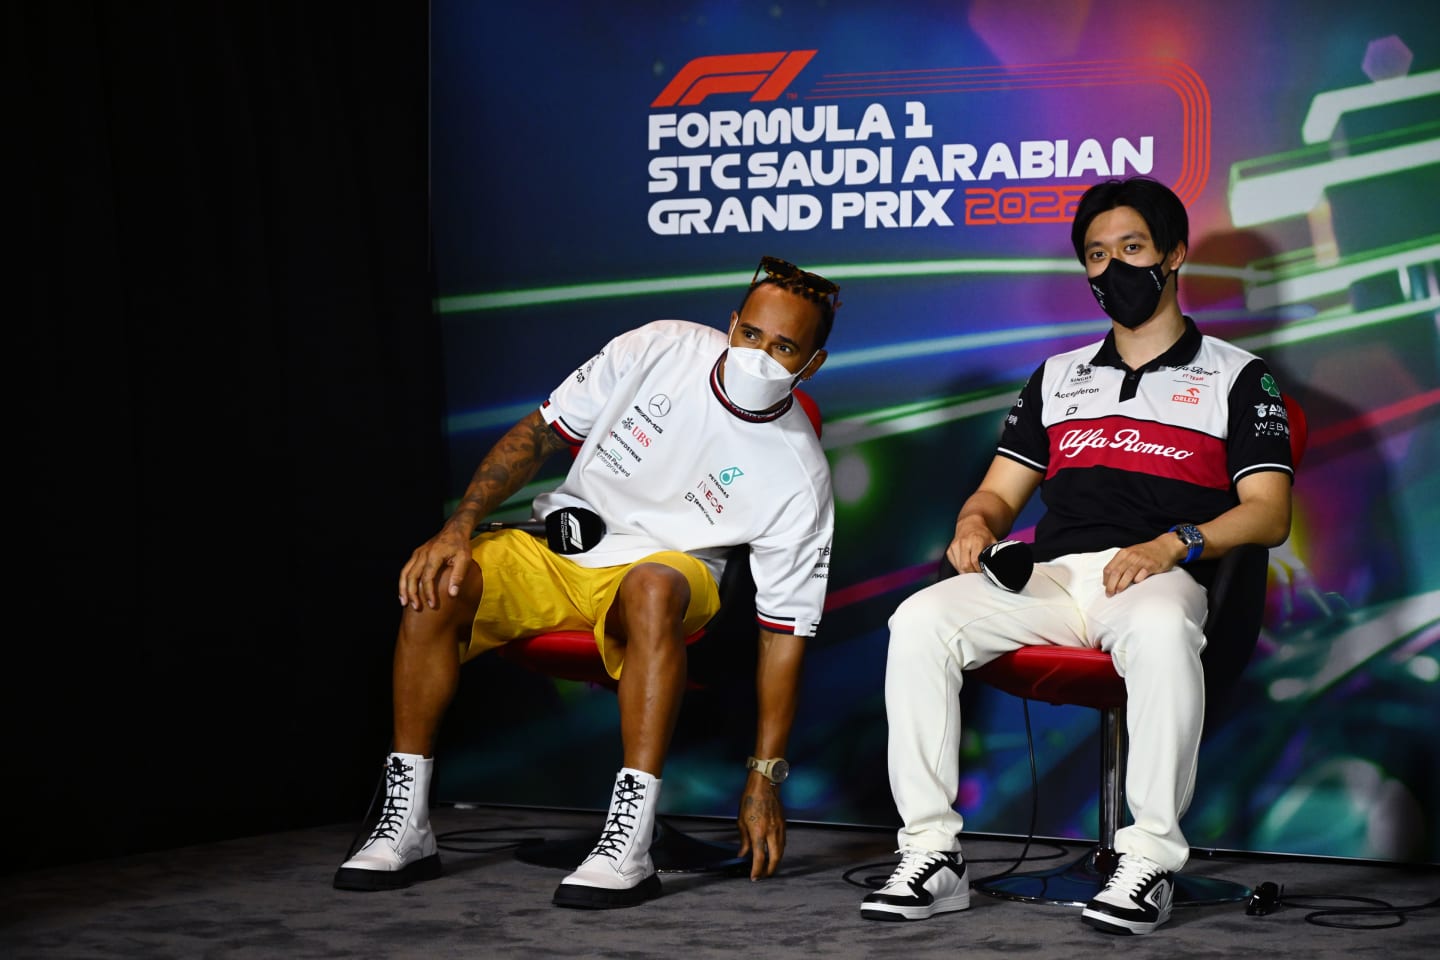 JEDDAH, SAUDI ARABIA - MARCH 25: Lewis Hamilton of Great Britain and Mercedes and Zhou Guanyu of China and Alfa Romeo F1 attend the Drivers Press Conference before practice ahead of the F1 Grand Prix of Saudi Arabia at the Jeddah Corniche Circuit on March 25, 2022 in Jeddah, Saudi Arabia. (Photo by Clive Mason/Getty Images)